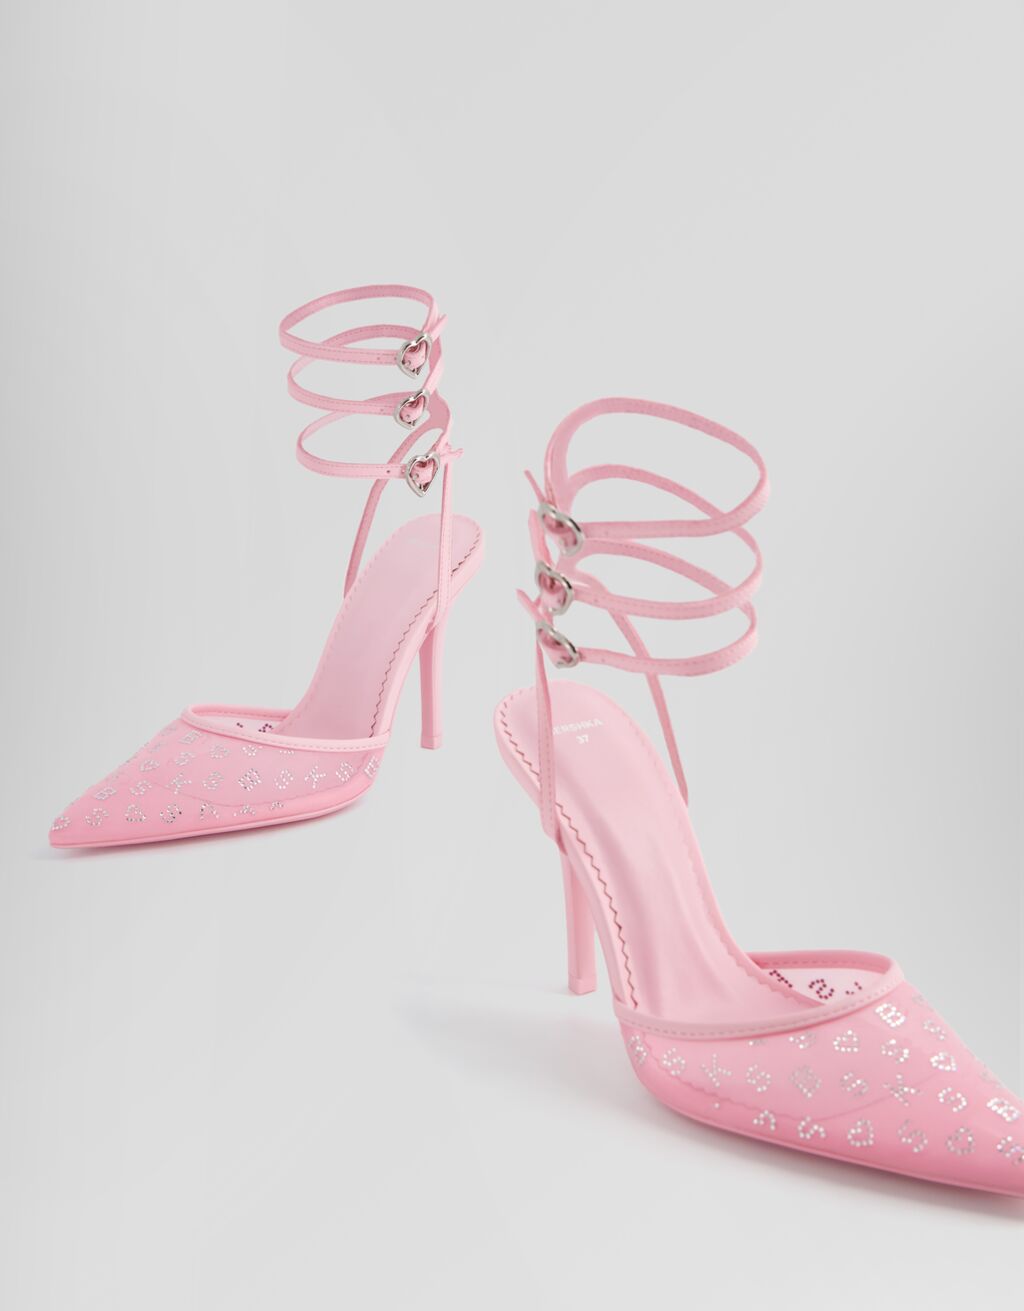 Shiny high-heel shoes with ankle straps and heart-shaped buckles.-Pink-3